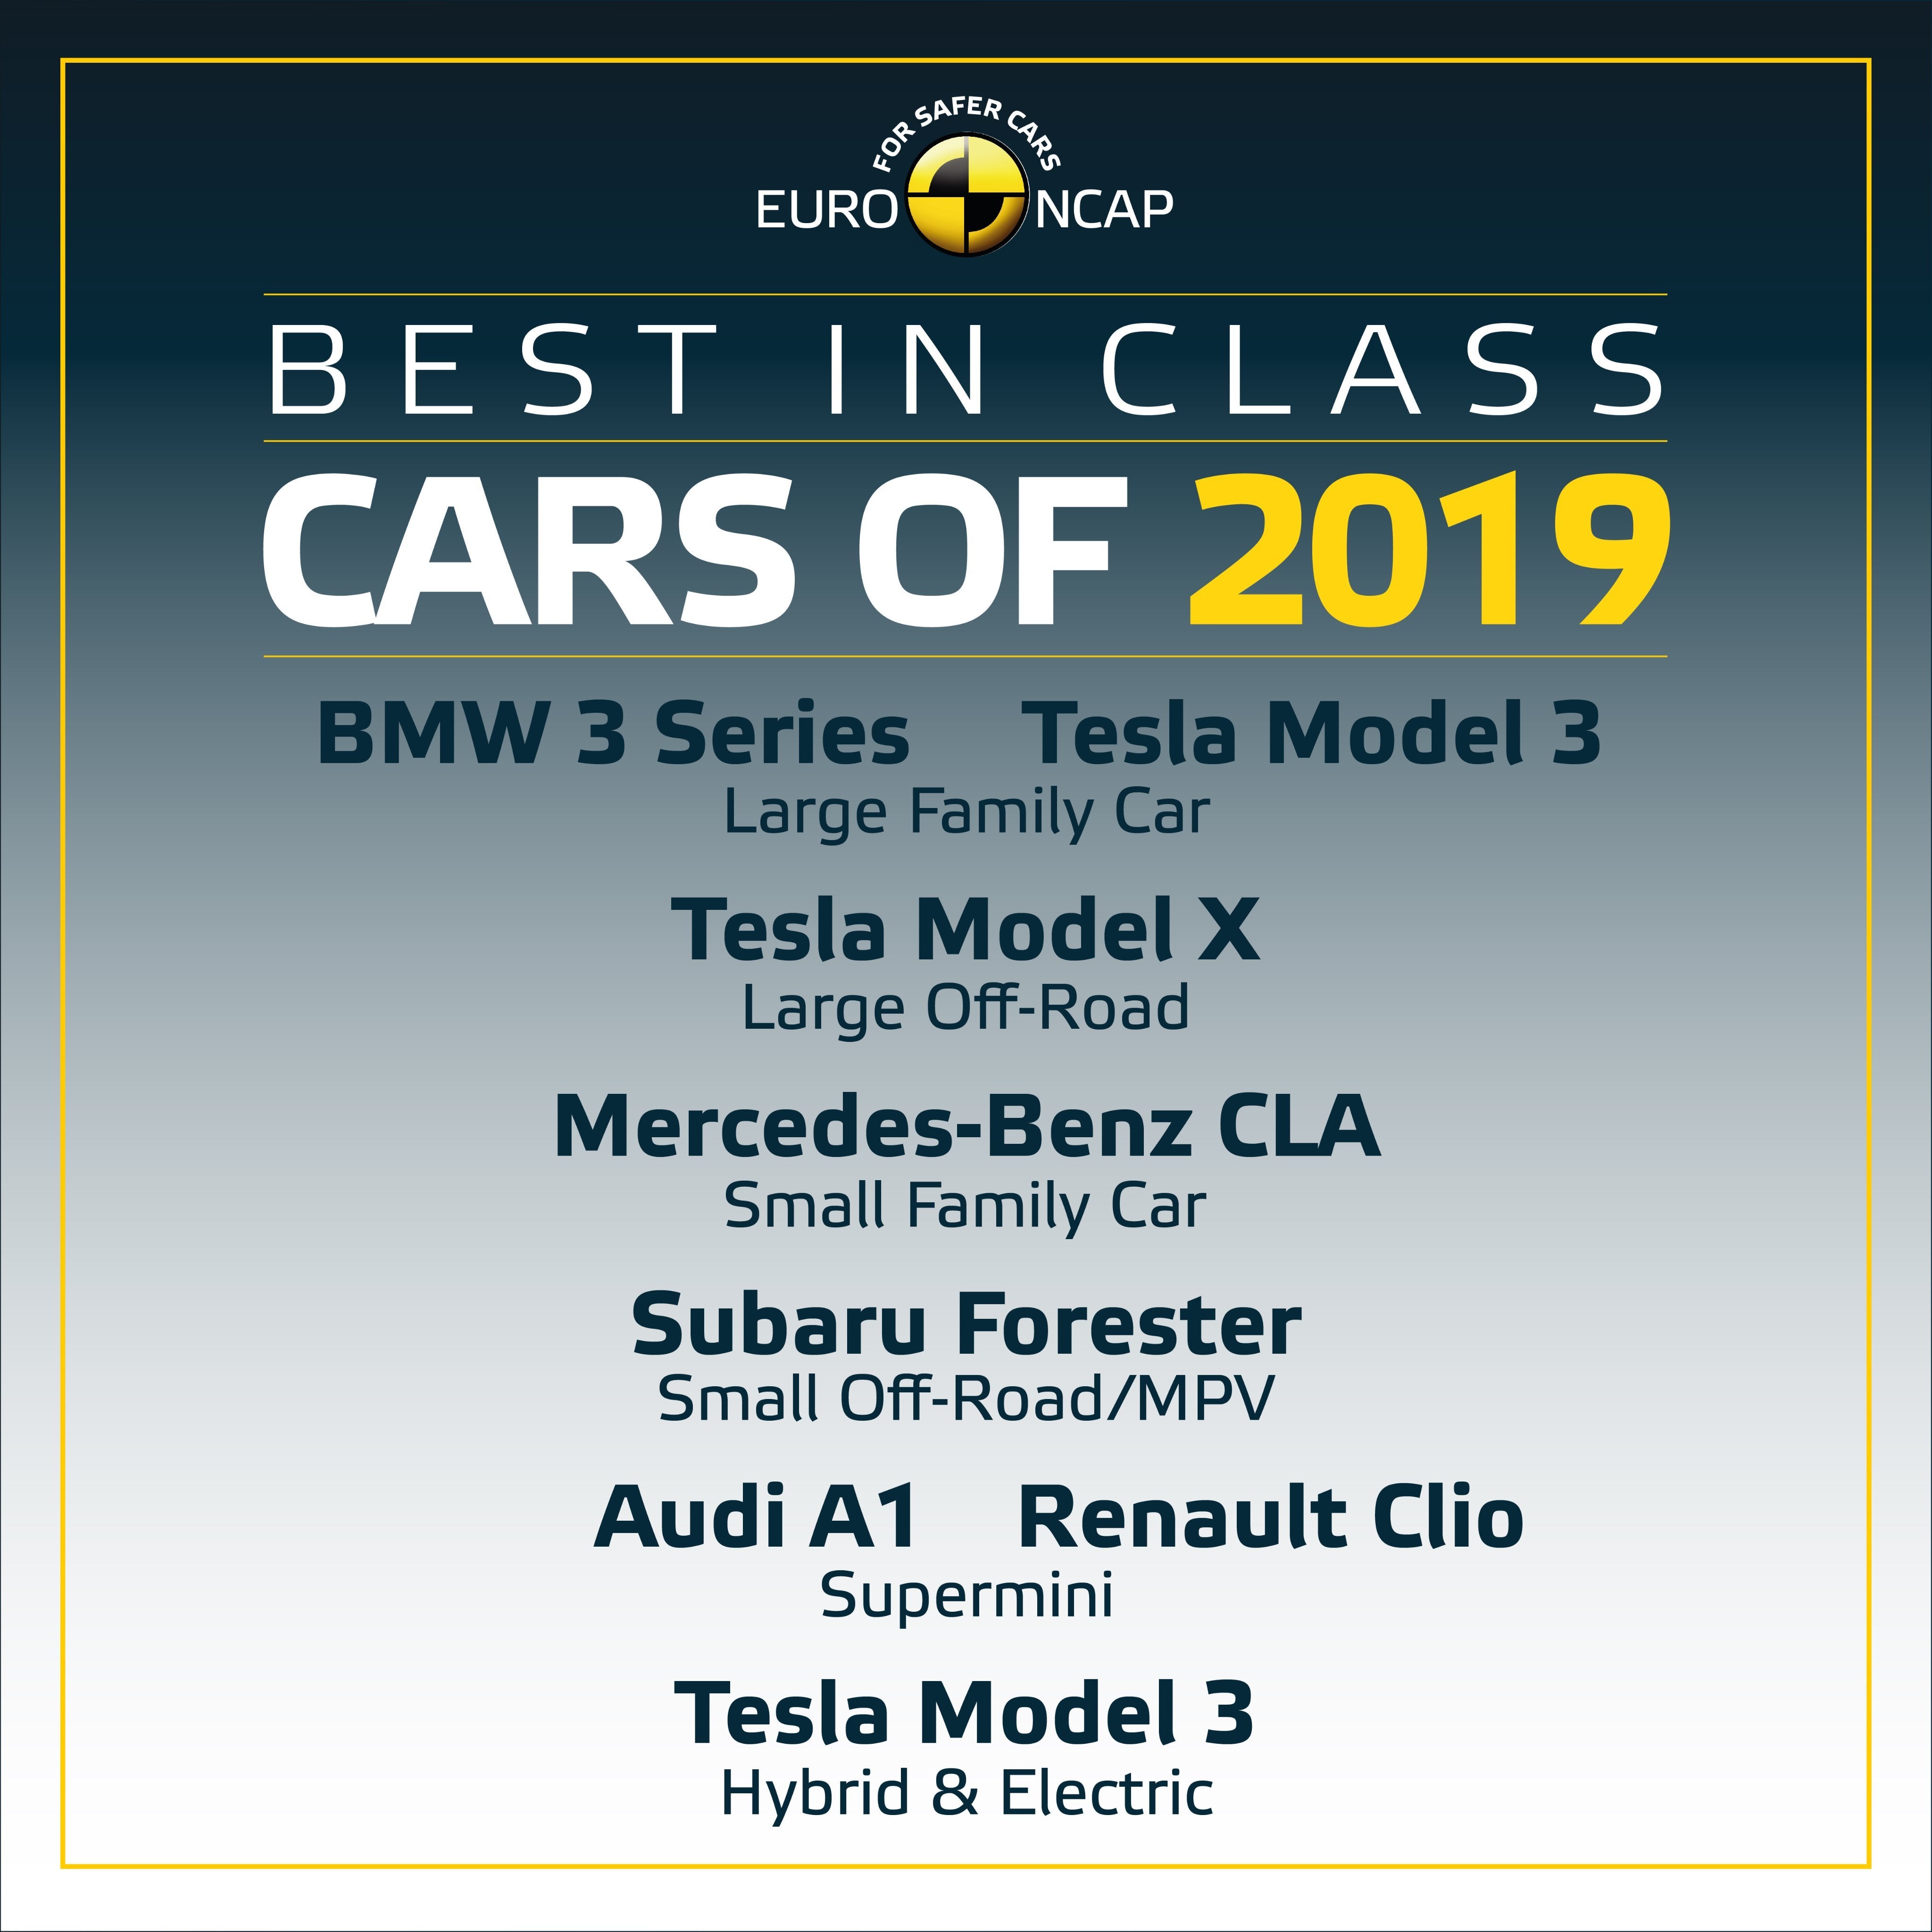 Tesla Model 3 and Model X are included in Euro NCAP's Best Of The Best In Class Cars of 2019